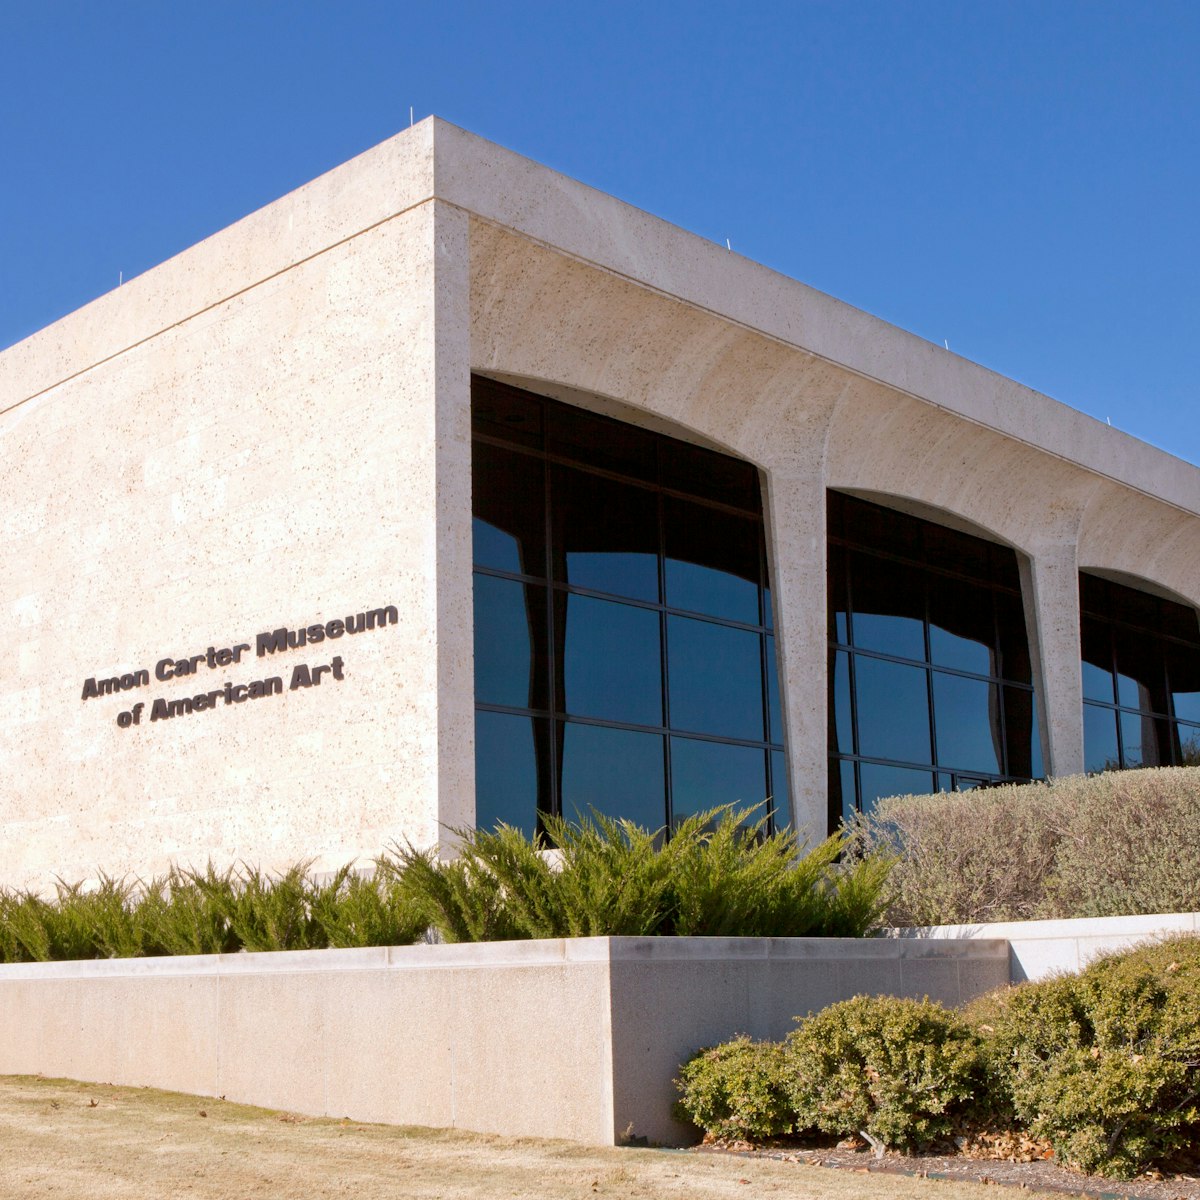 Ft Worth, Texas, USA - January 6, 2015: The Amon Carter Museum of American Art is located in the cultural district of Fort Worth, Texas. The museum devoted to American art and possesses one of the premier collections of American photography in the nation.
Amon Carter Museum - Ft Worth, Texas Landmark - stock photo
